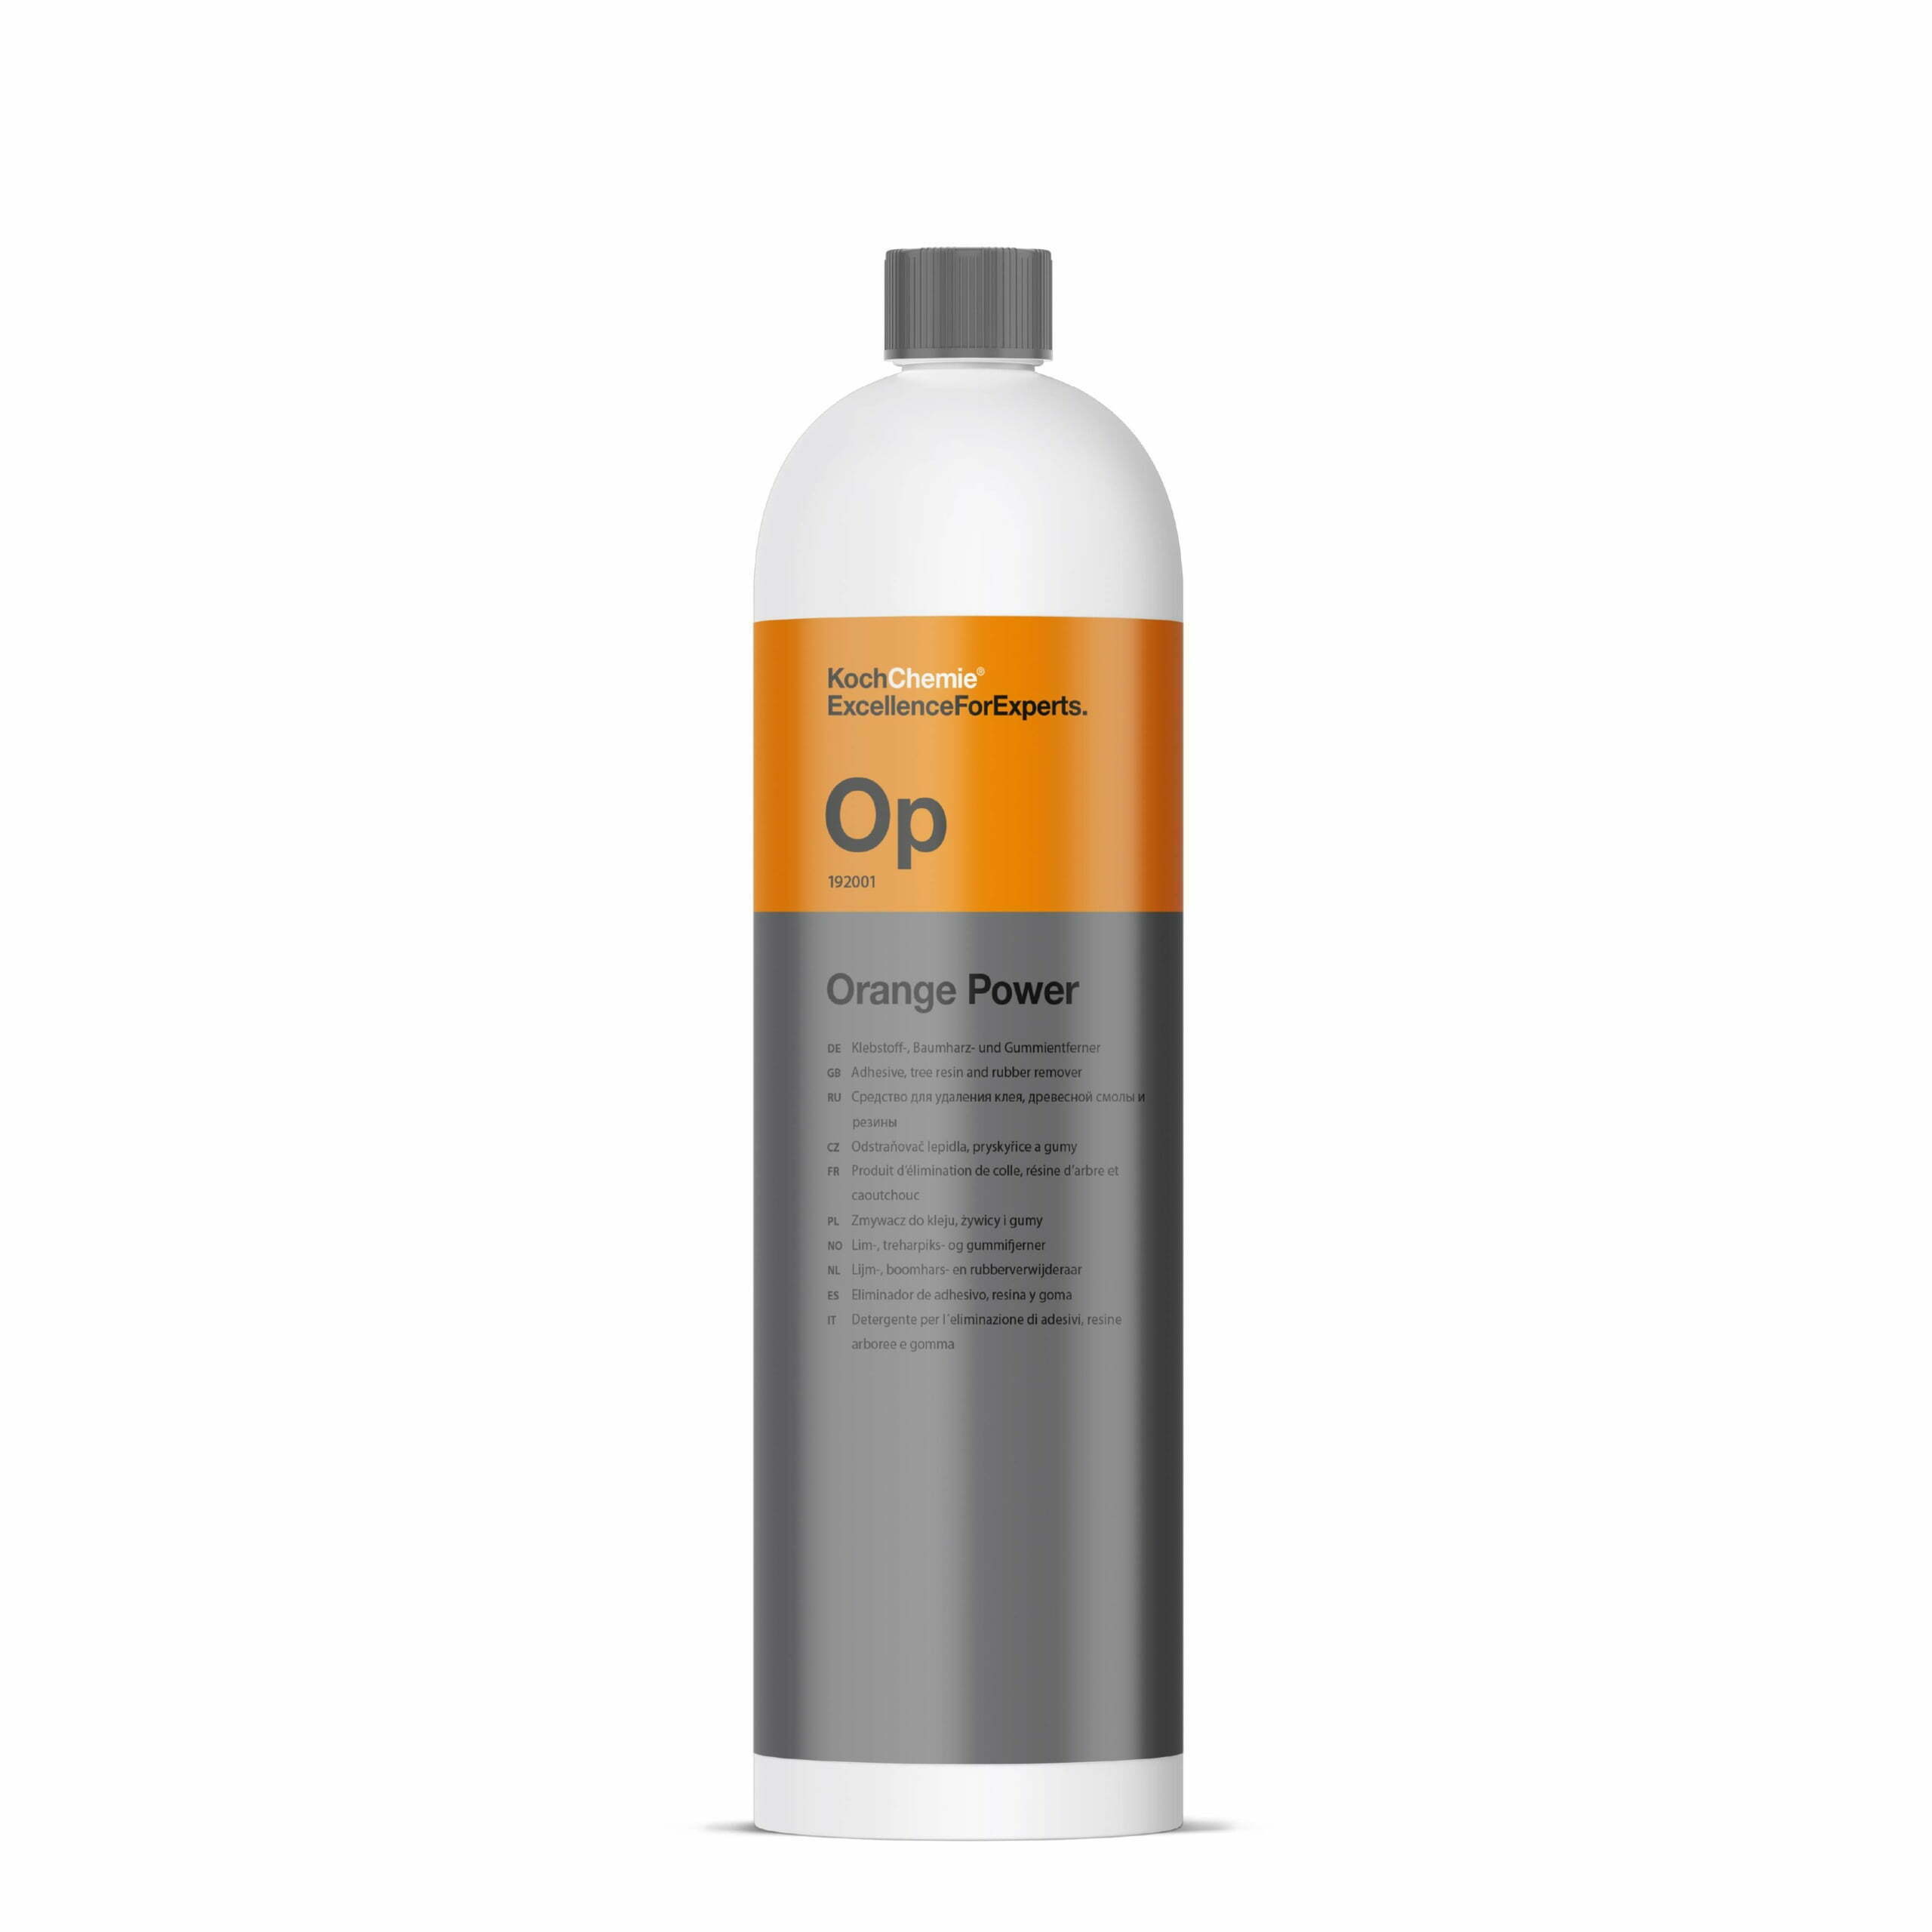 Koch-Chemie Orange Power Op — Natural Extract-Based Stain Remover —  Halogenated Hydrocarbons-Free - Koch-Chemie New Zealand